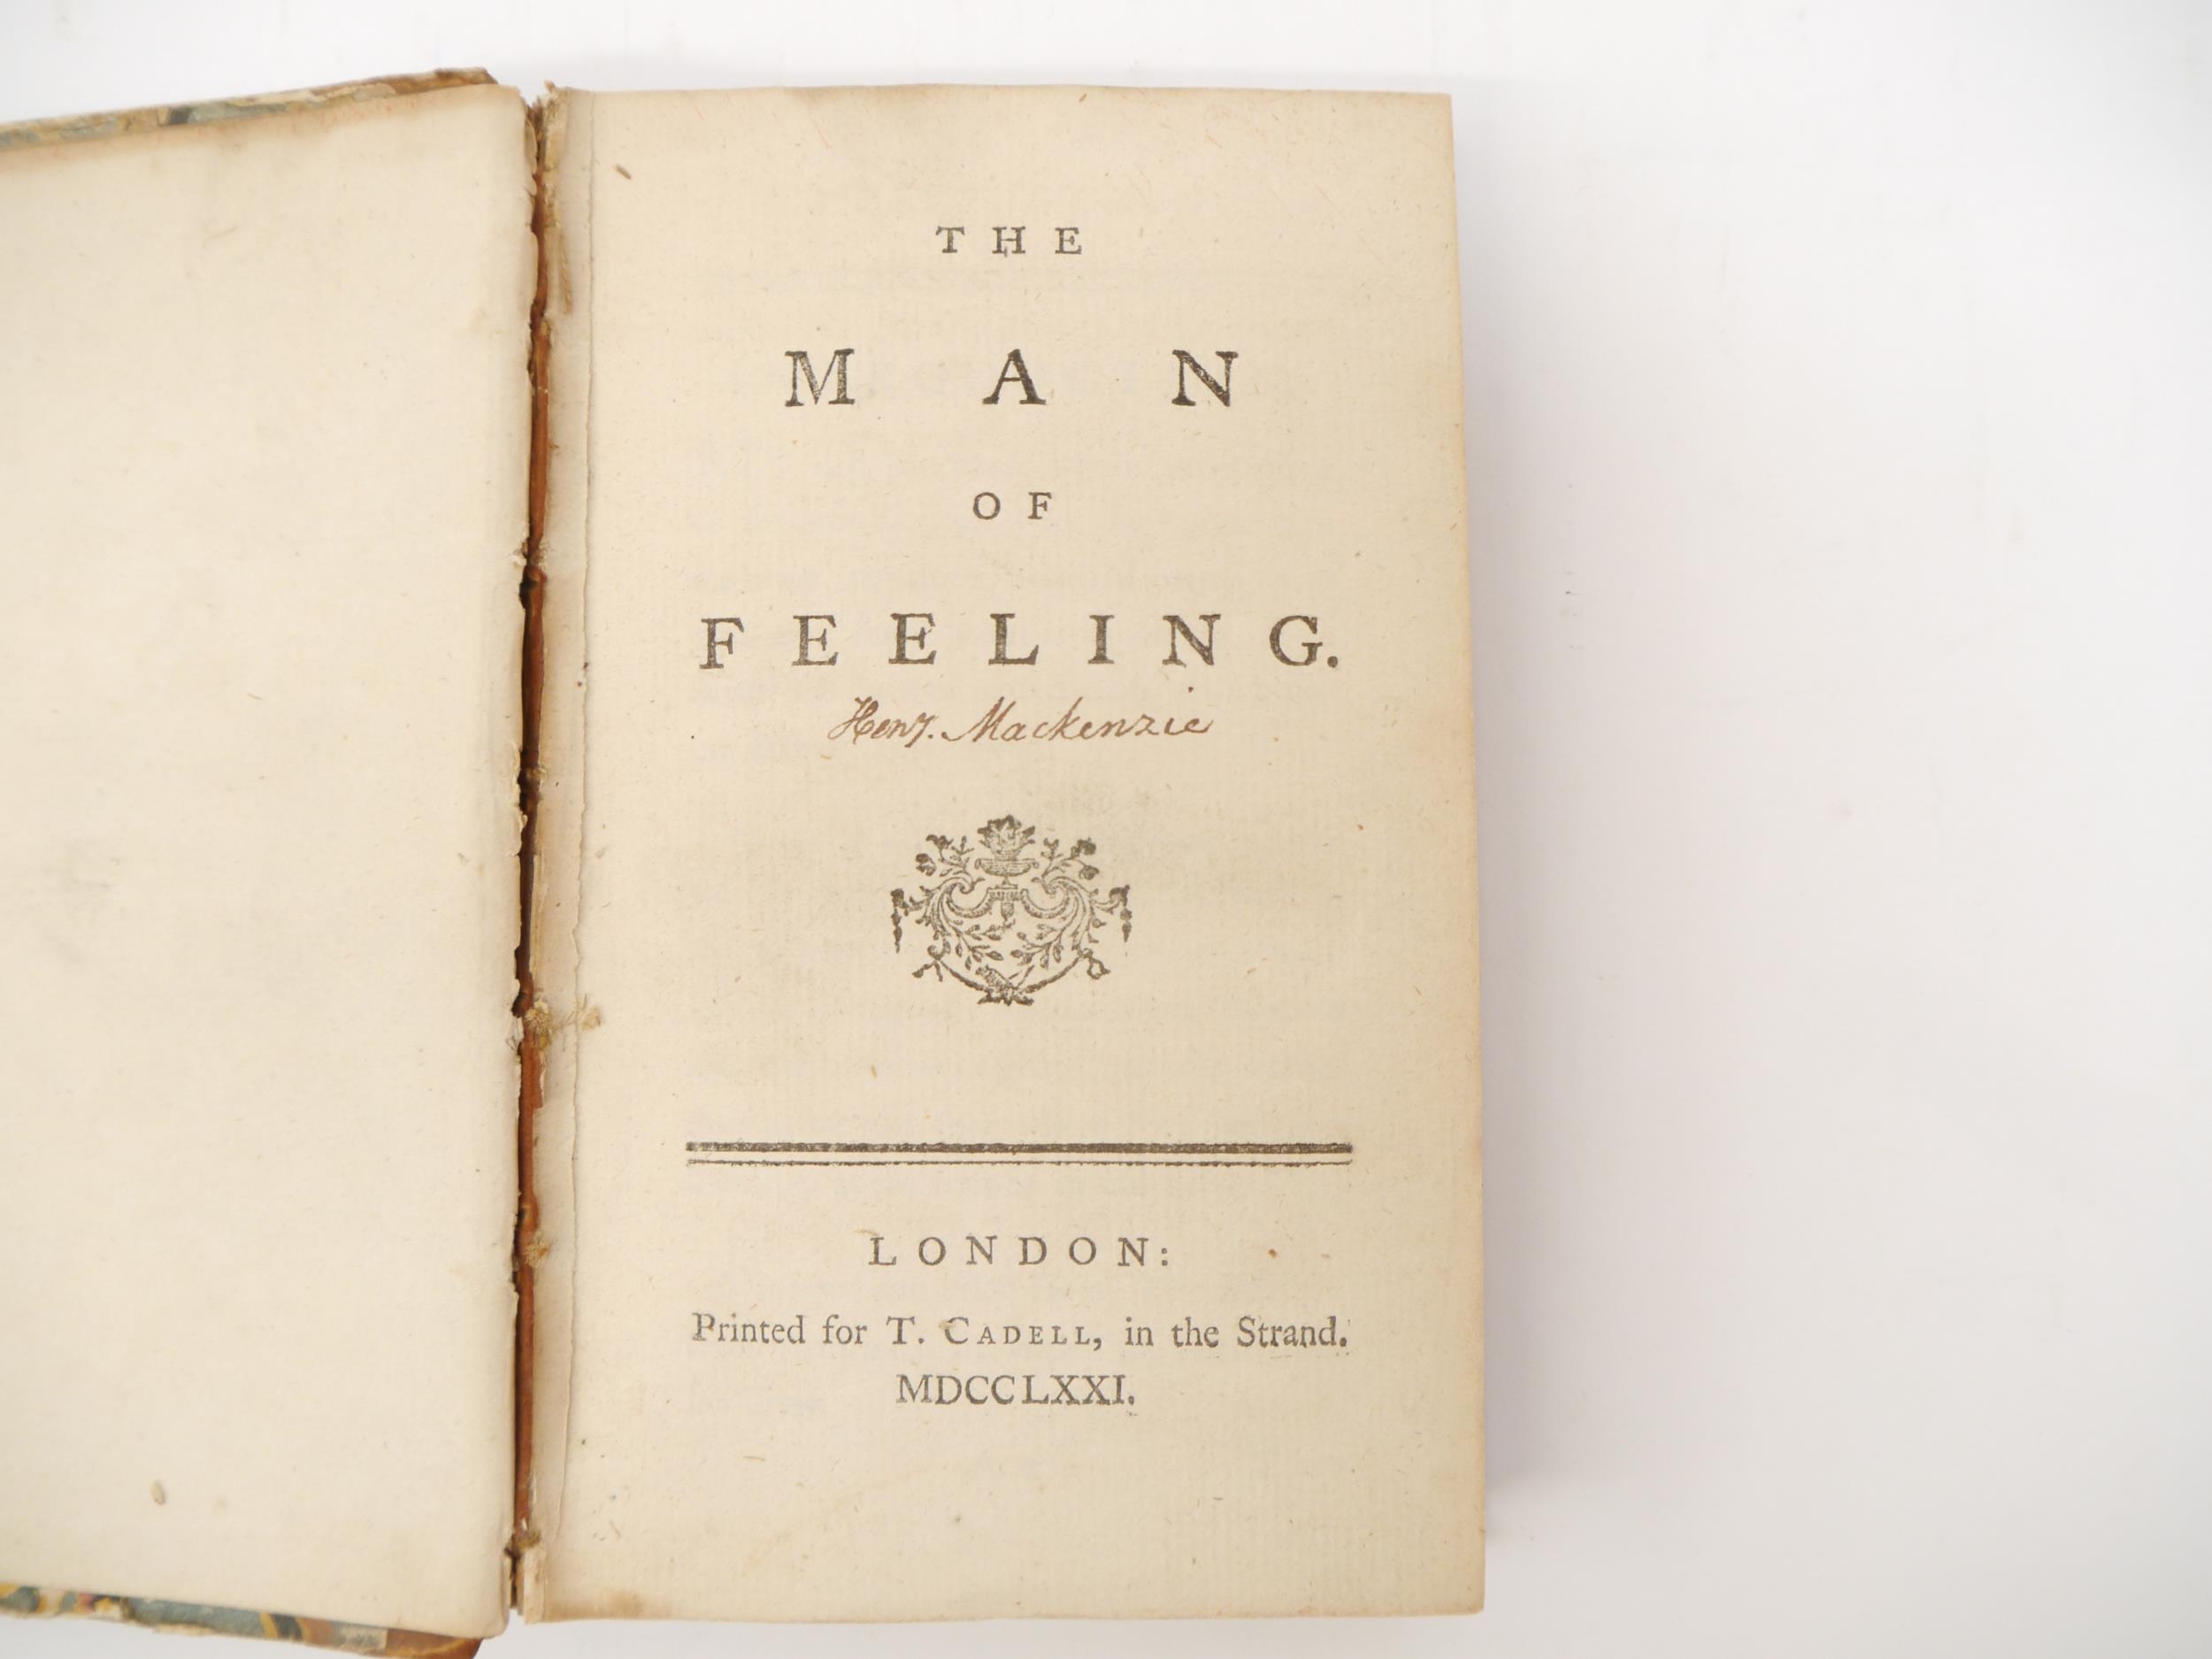 [Henry Mackenzie]: 'The Man of Feeling', London, T. Cadell, 1771, 1st edition, signed by the